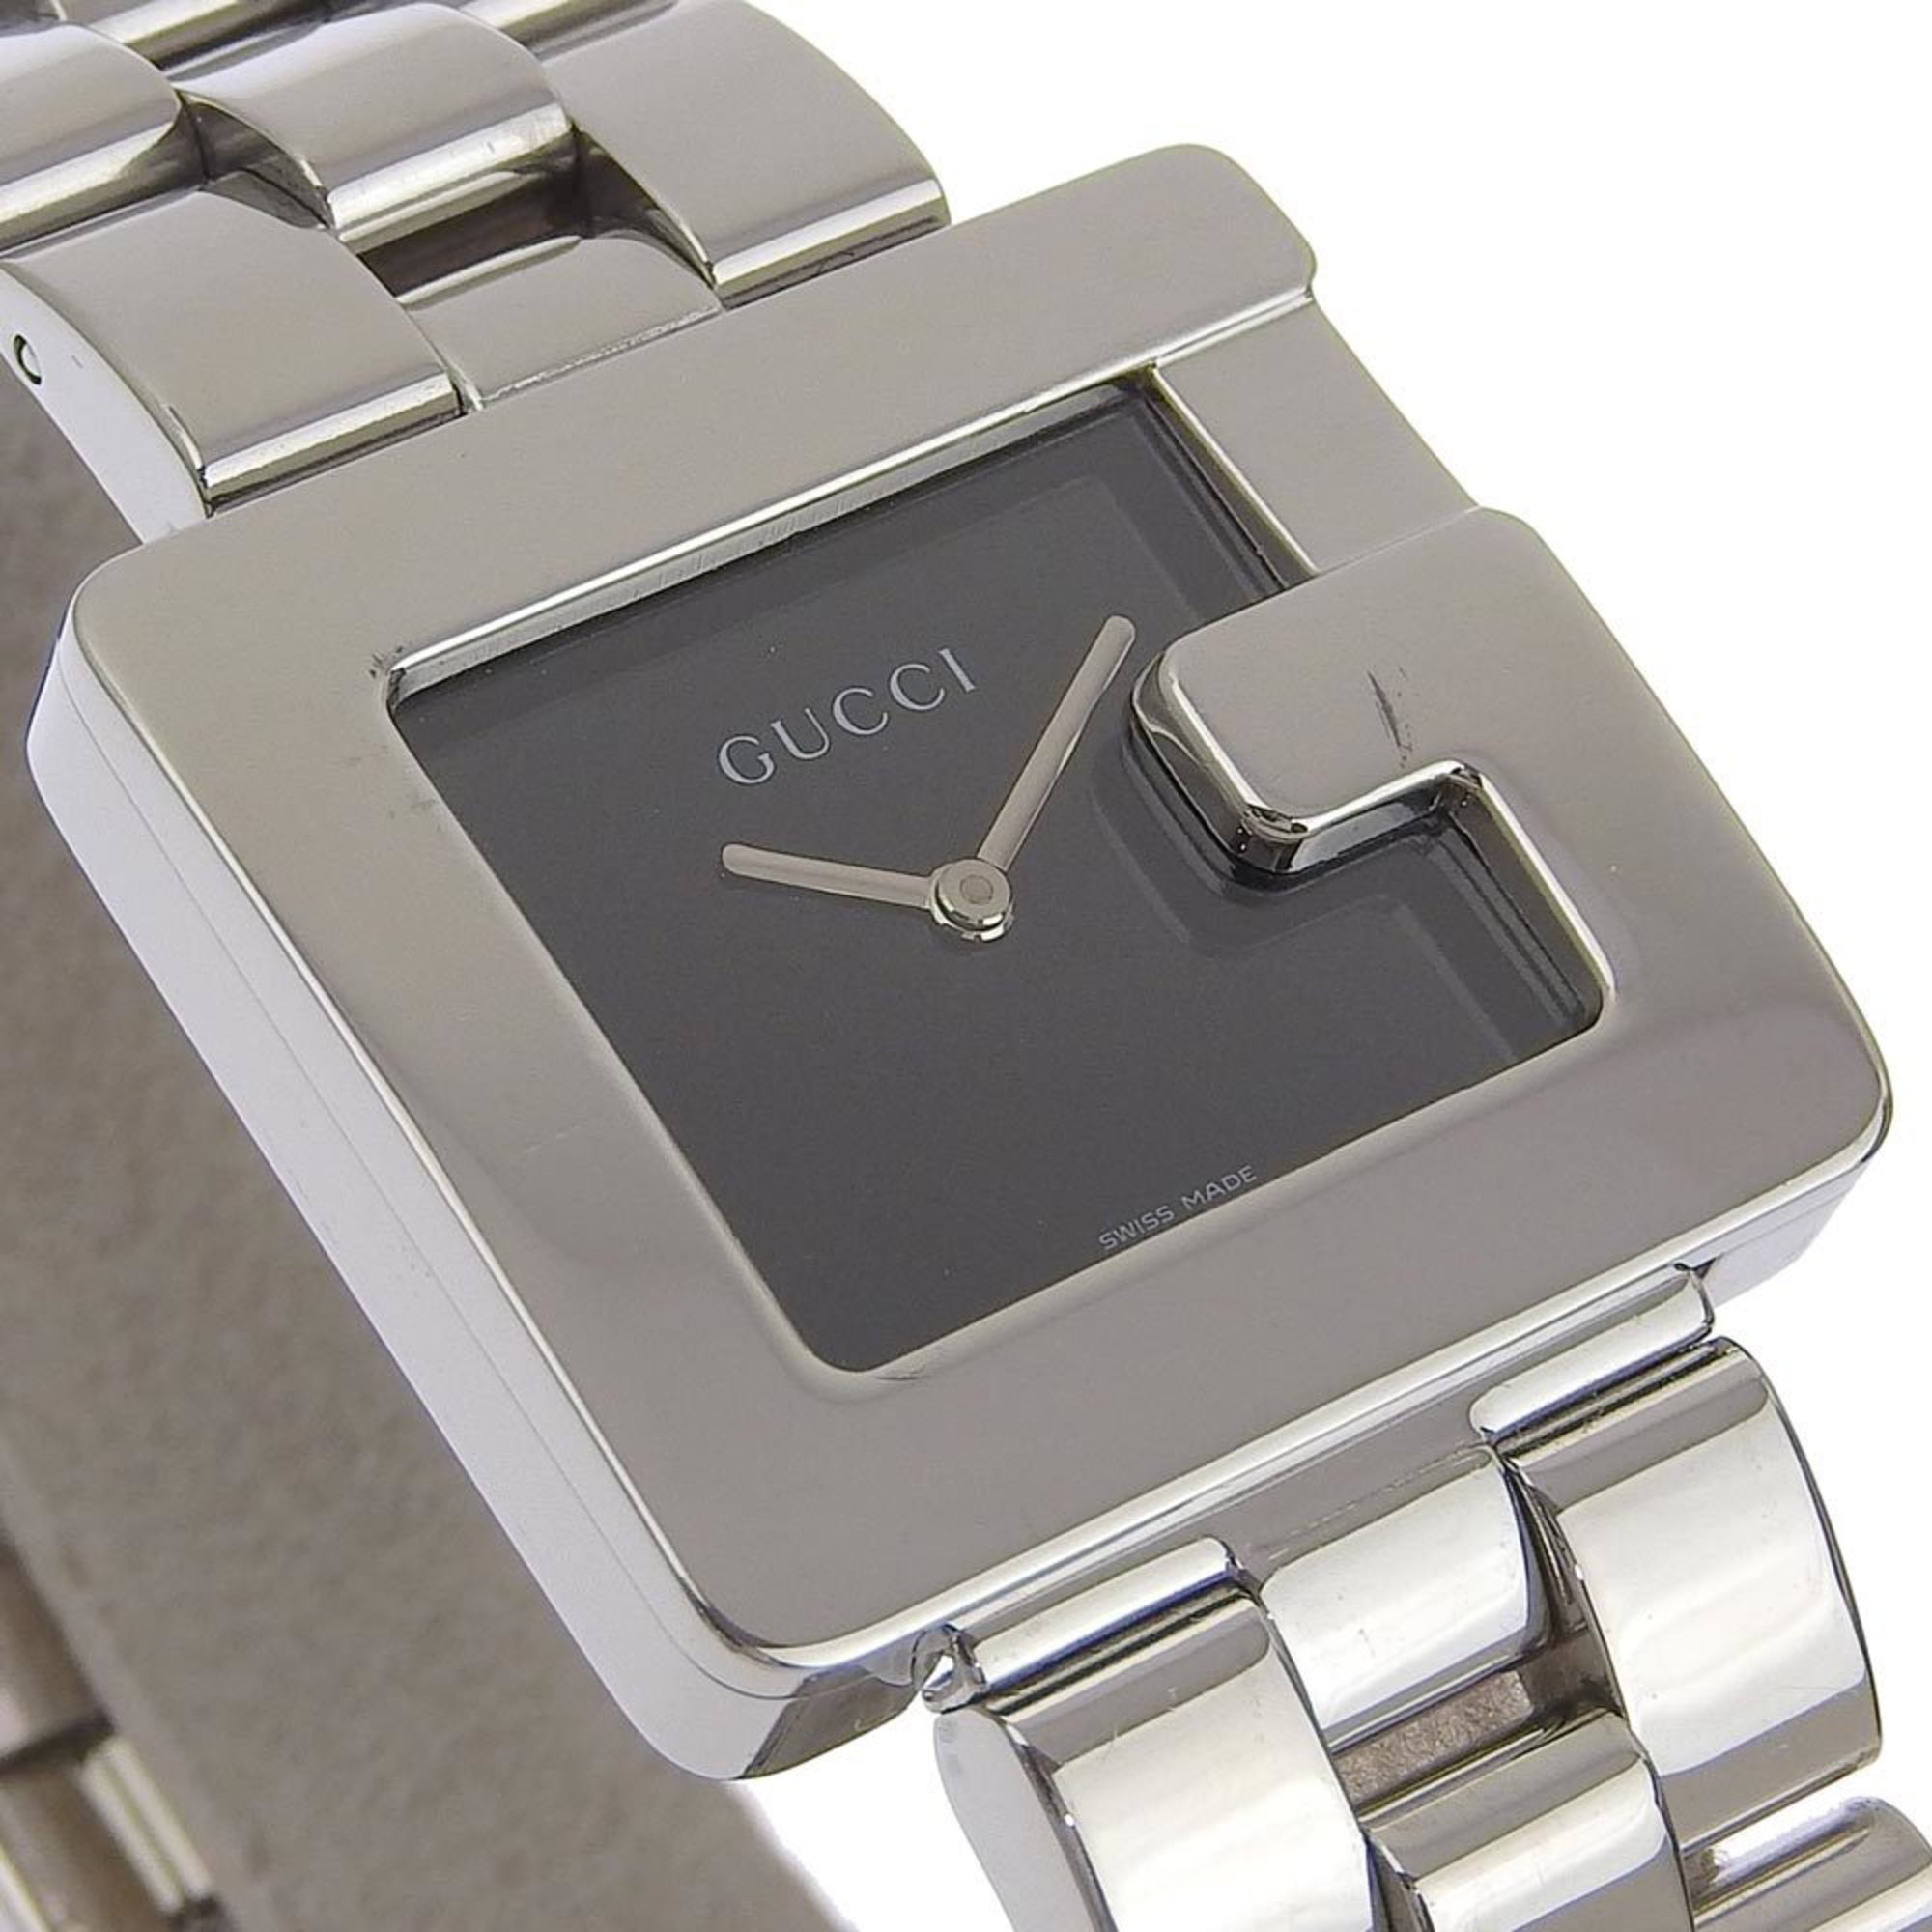 GUCCI Watch 4600L Stainless Steel Swiss Made Silver Quartz Analog Display Black Dial Ladies